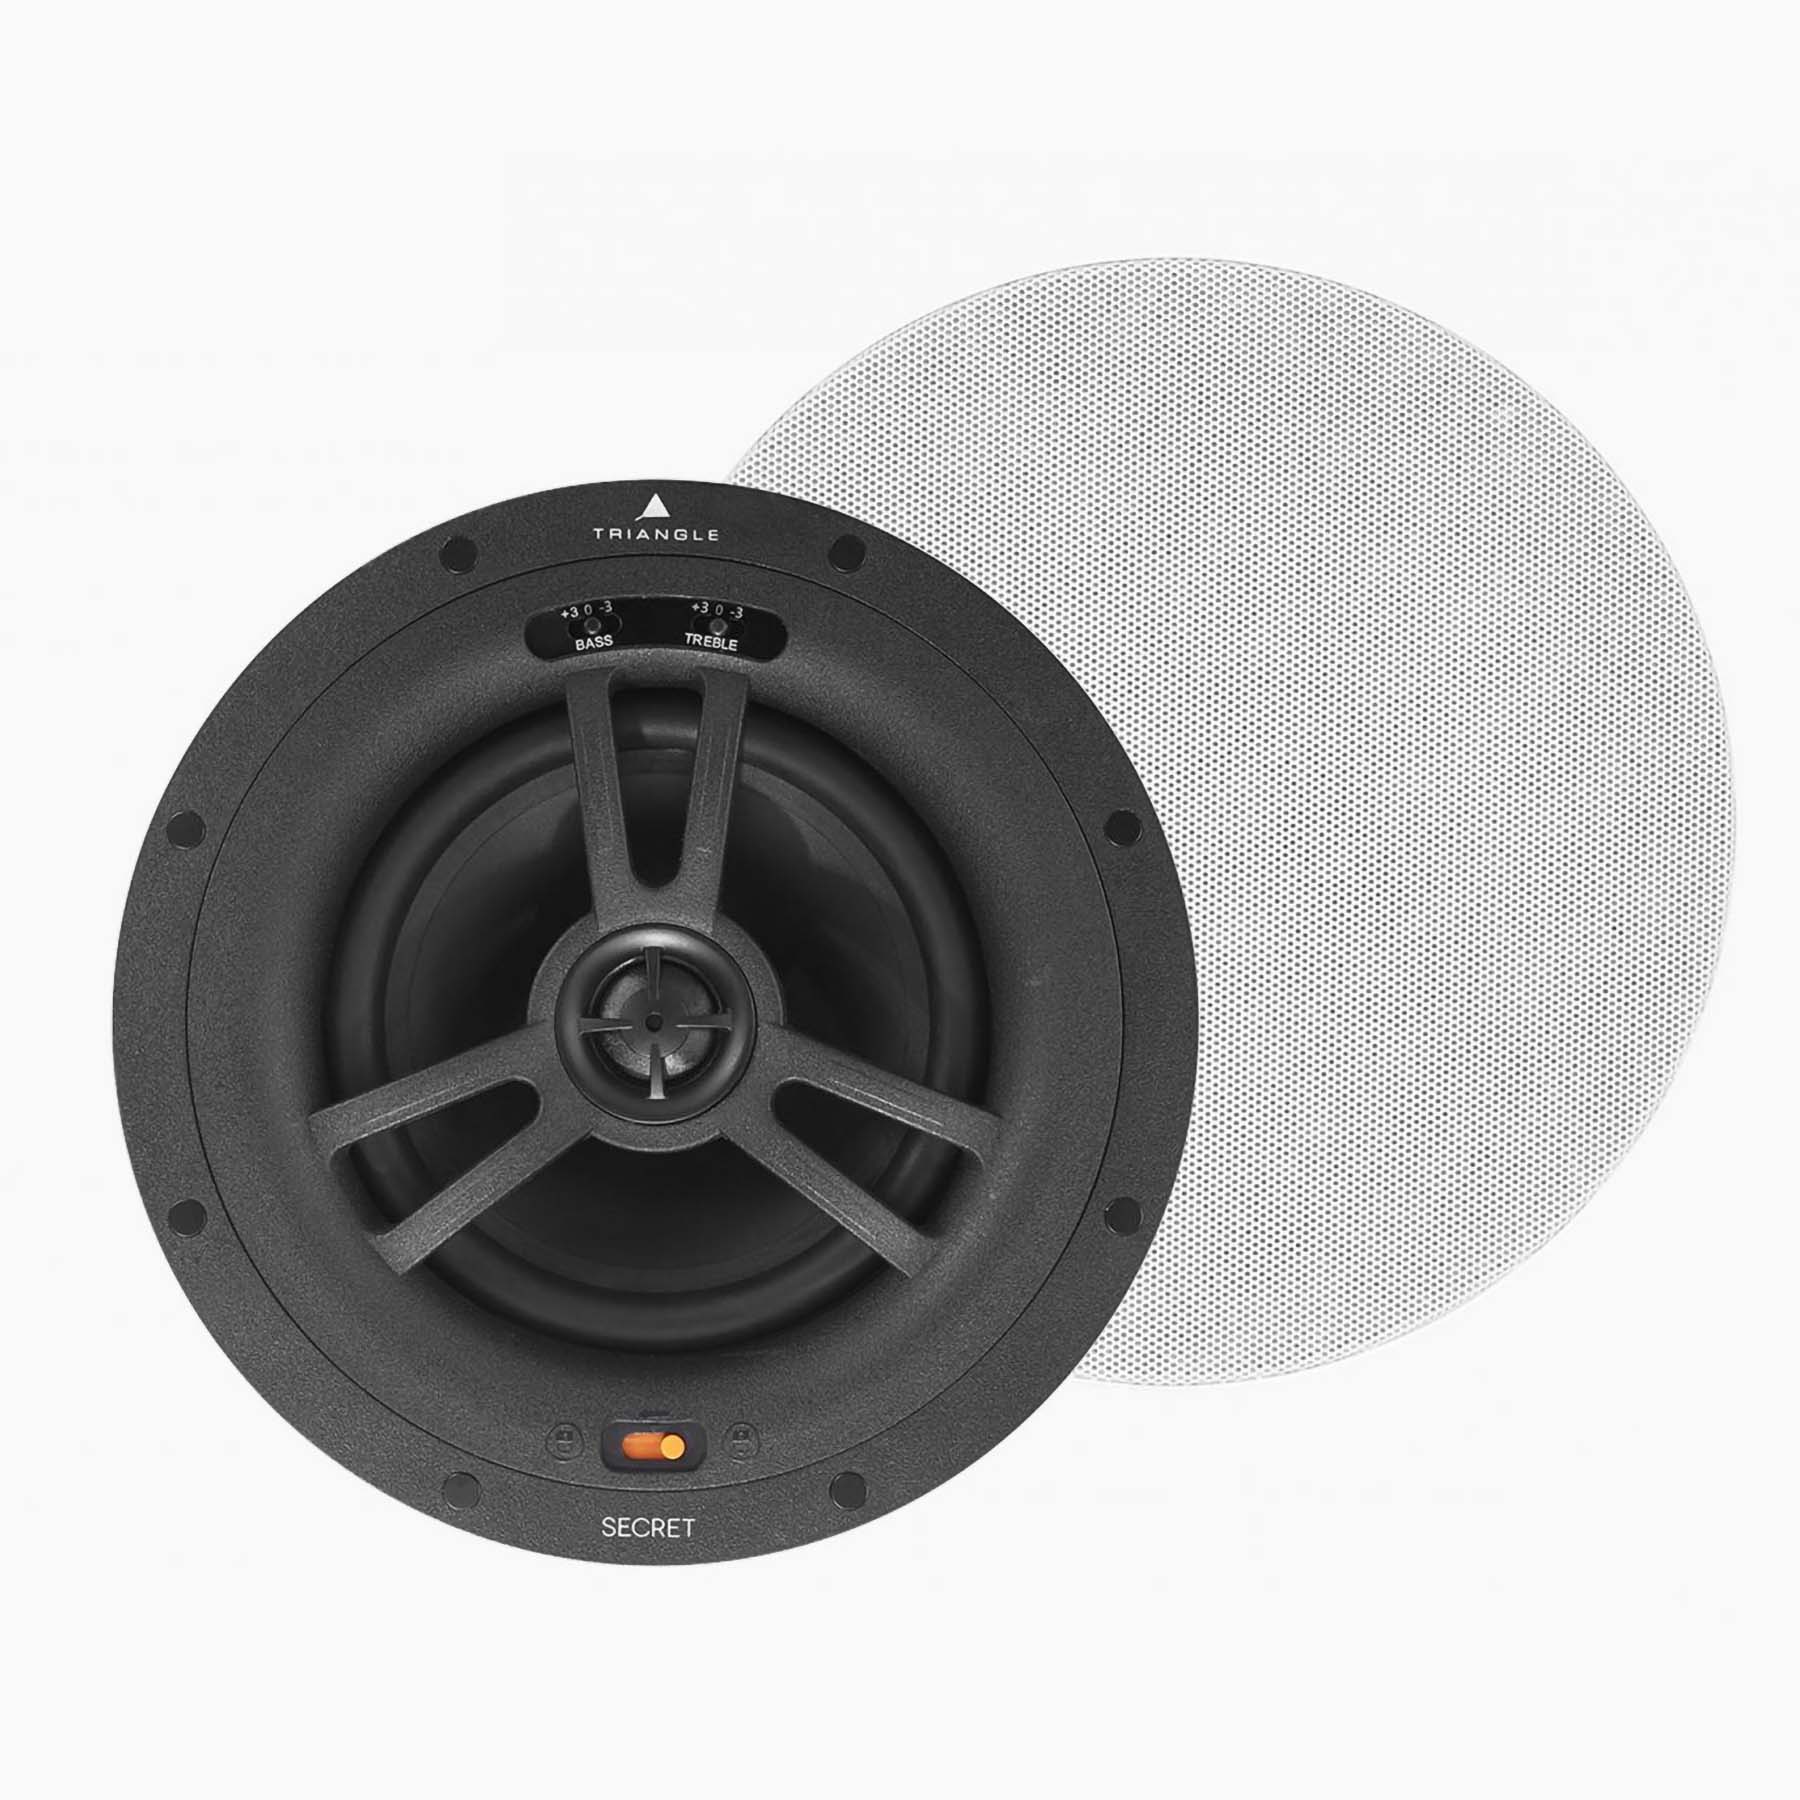 TRIANGLE Secret EMT7 "Easy Mounting" 6.7-inch In-Ceiling Flush-Mount Speakers (pair)